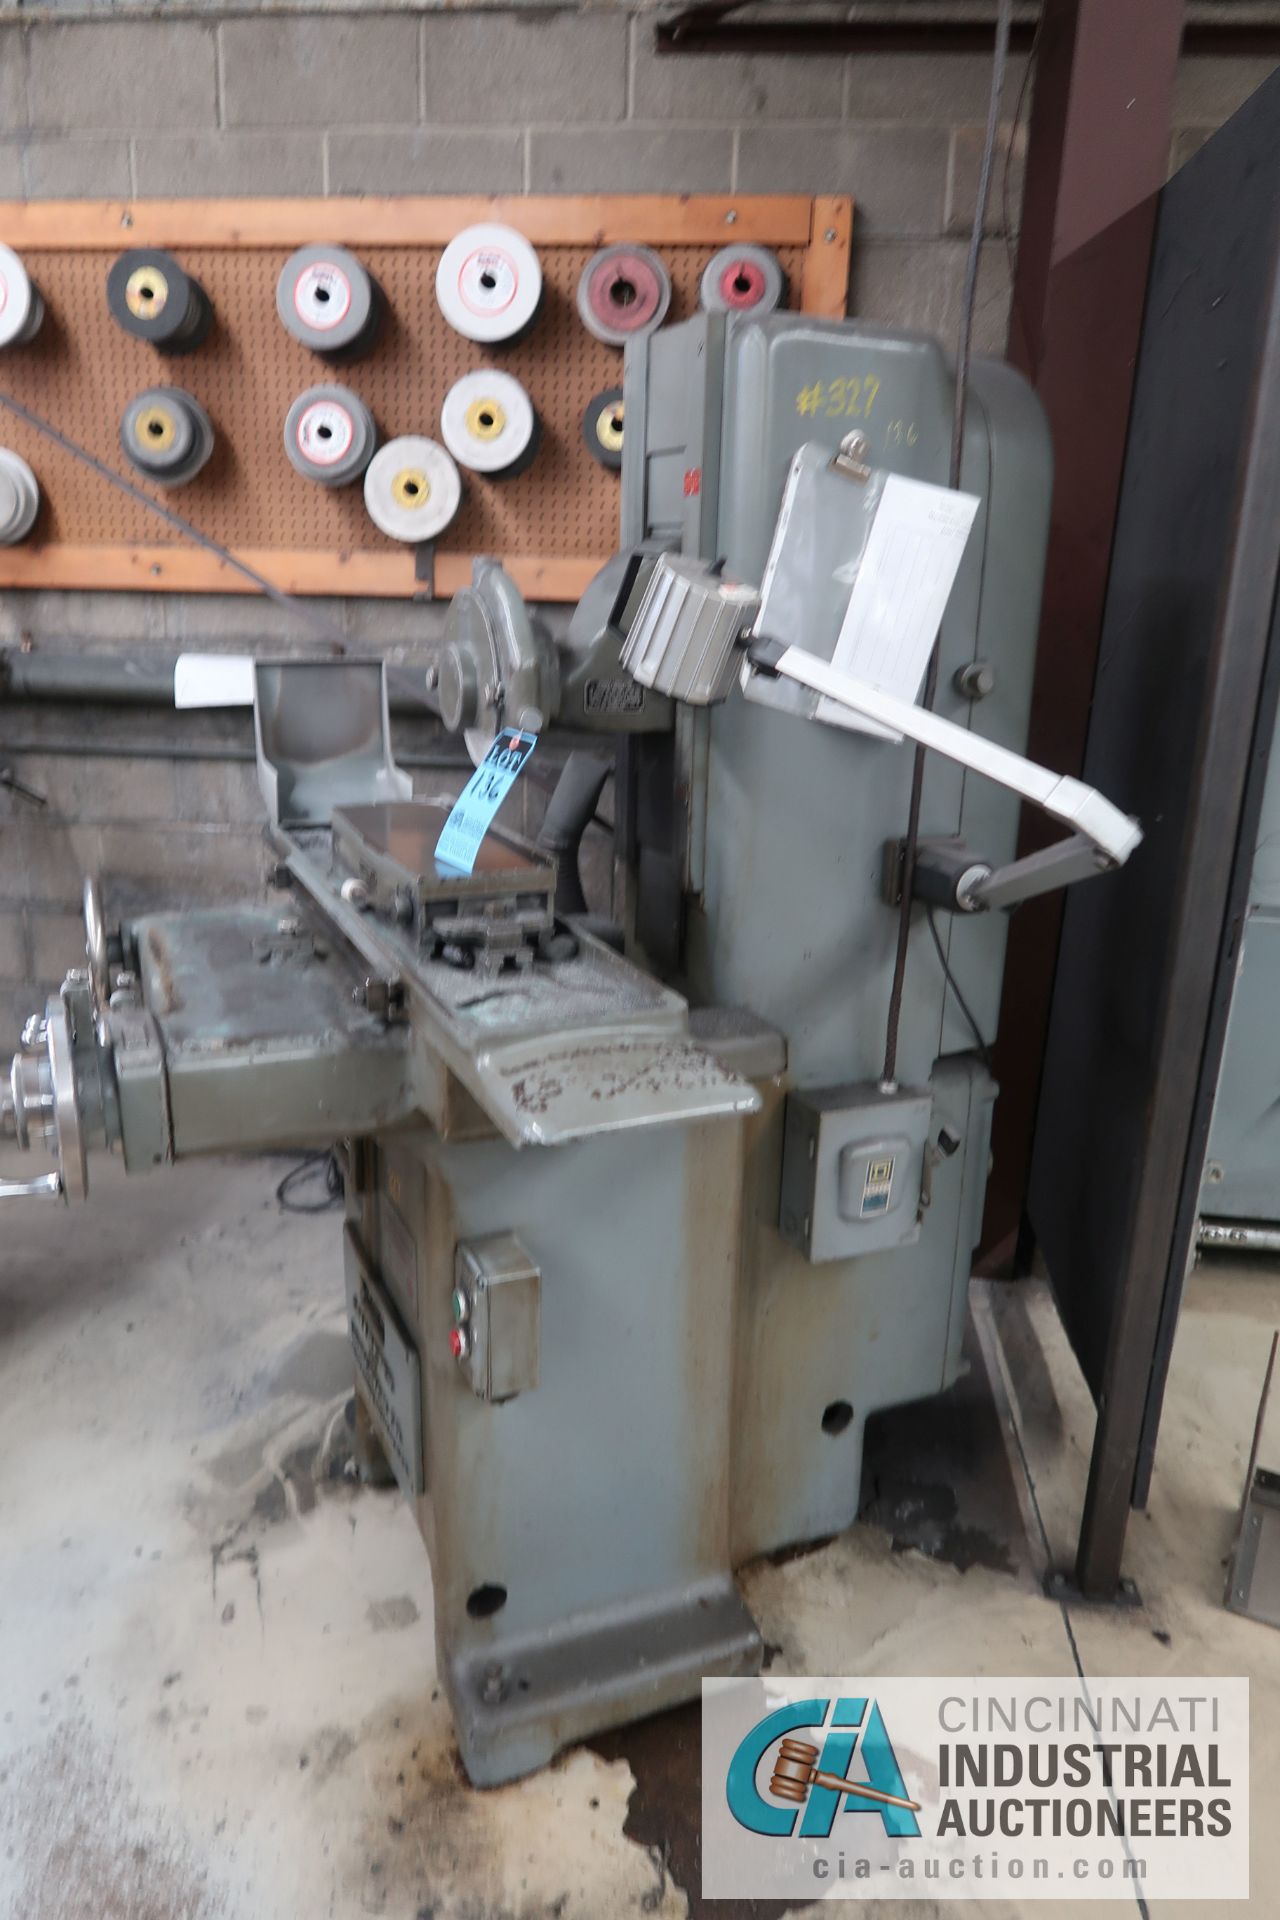 6" X 18" GALLMEYER AND LIVINGSTON MODEL 20 HAND FEED SURFACE GRINDER; S/N S-20159 *NEW 1965* - Image 4 of 7